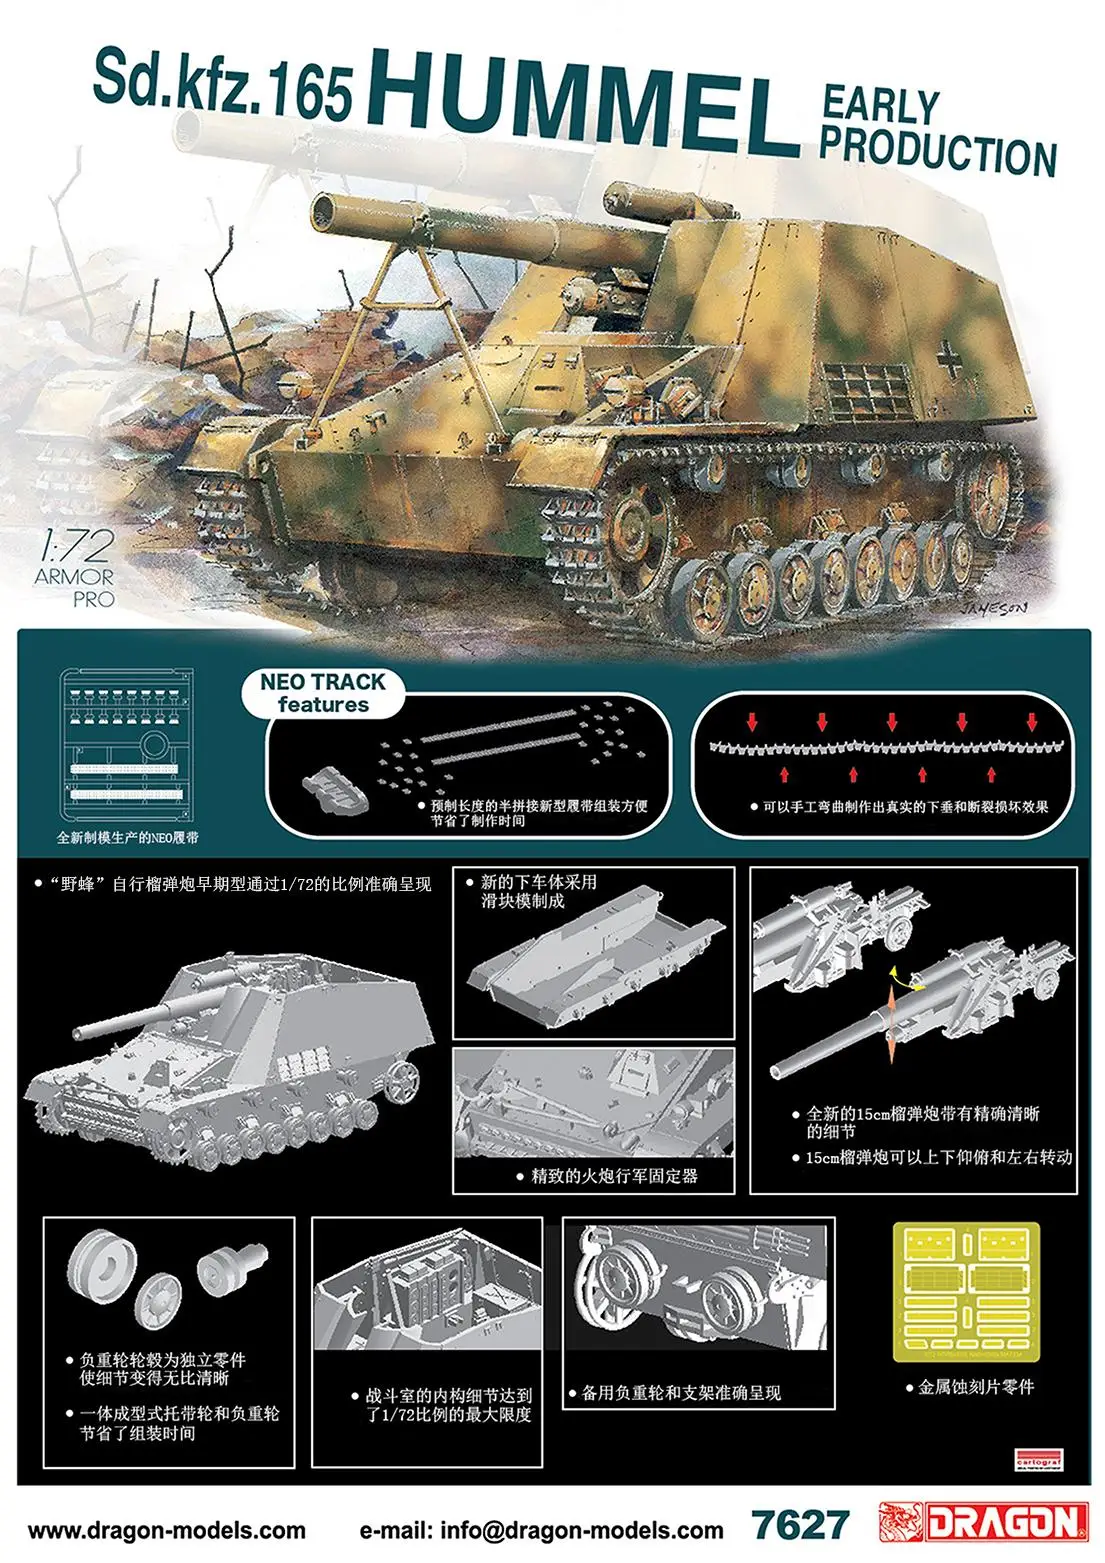 

Dragon 7627 1/72 SD.KFZ.165 HUMMEL EARLY PRODUCTION NEO TRACK FEATURES